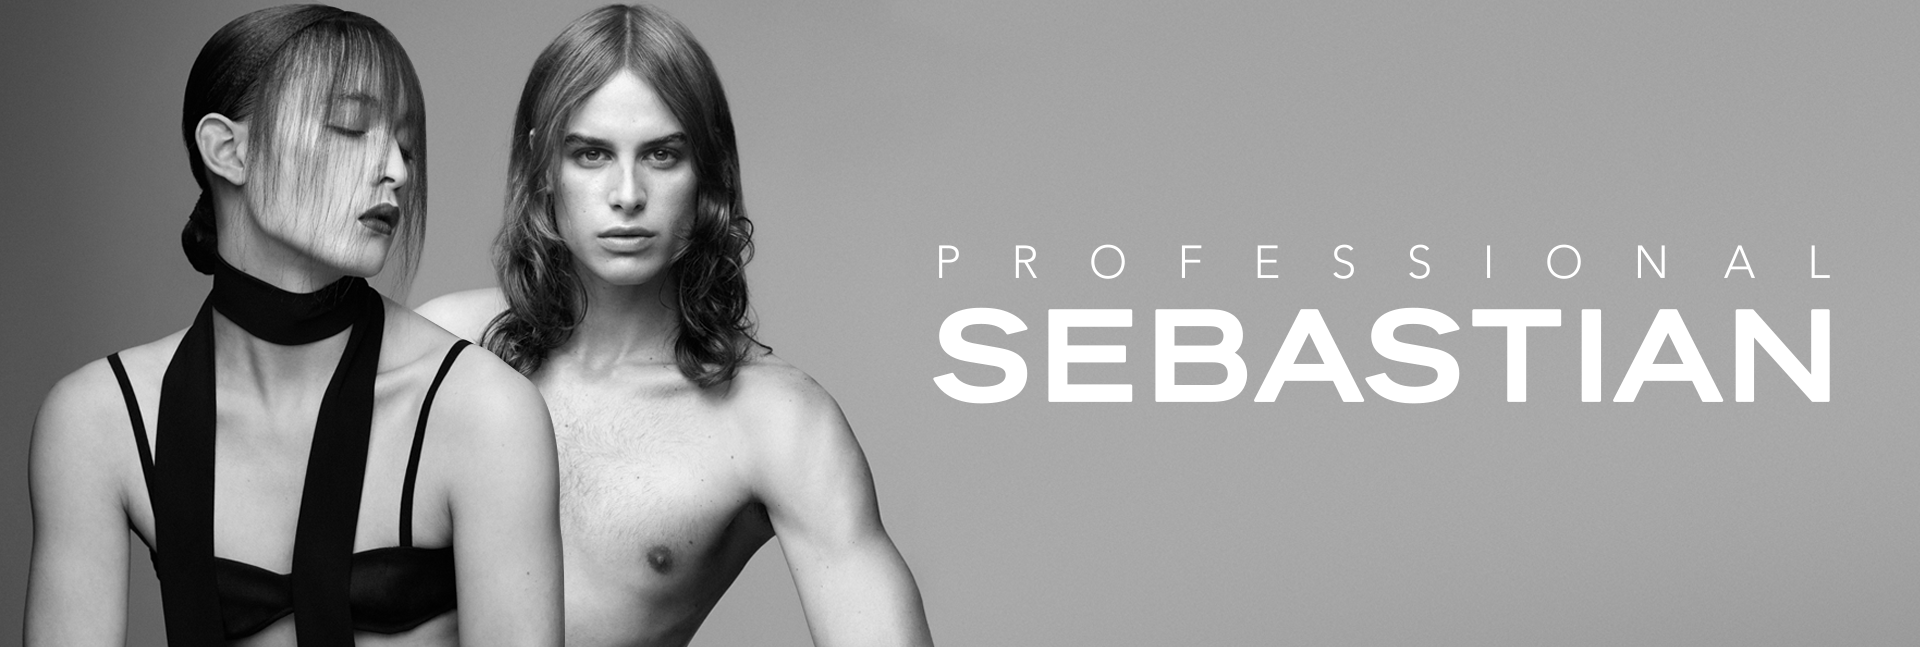 Sebastian Professional Styling, Hair Care and Color Products for limitless self-expression